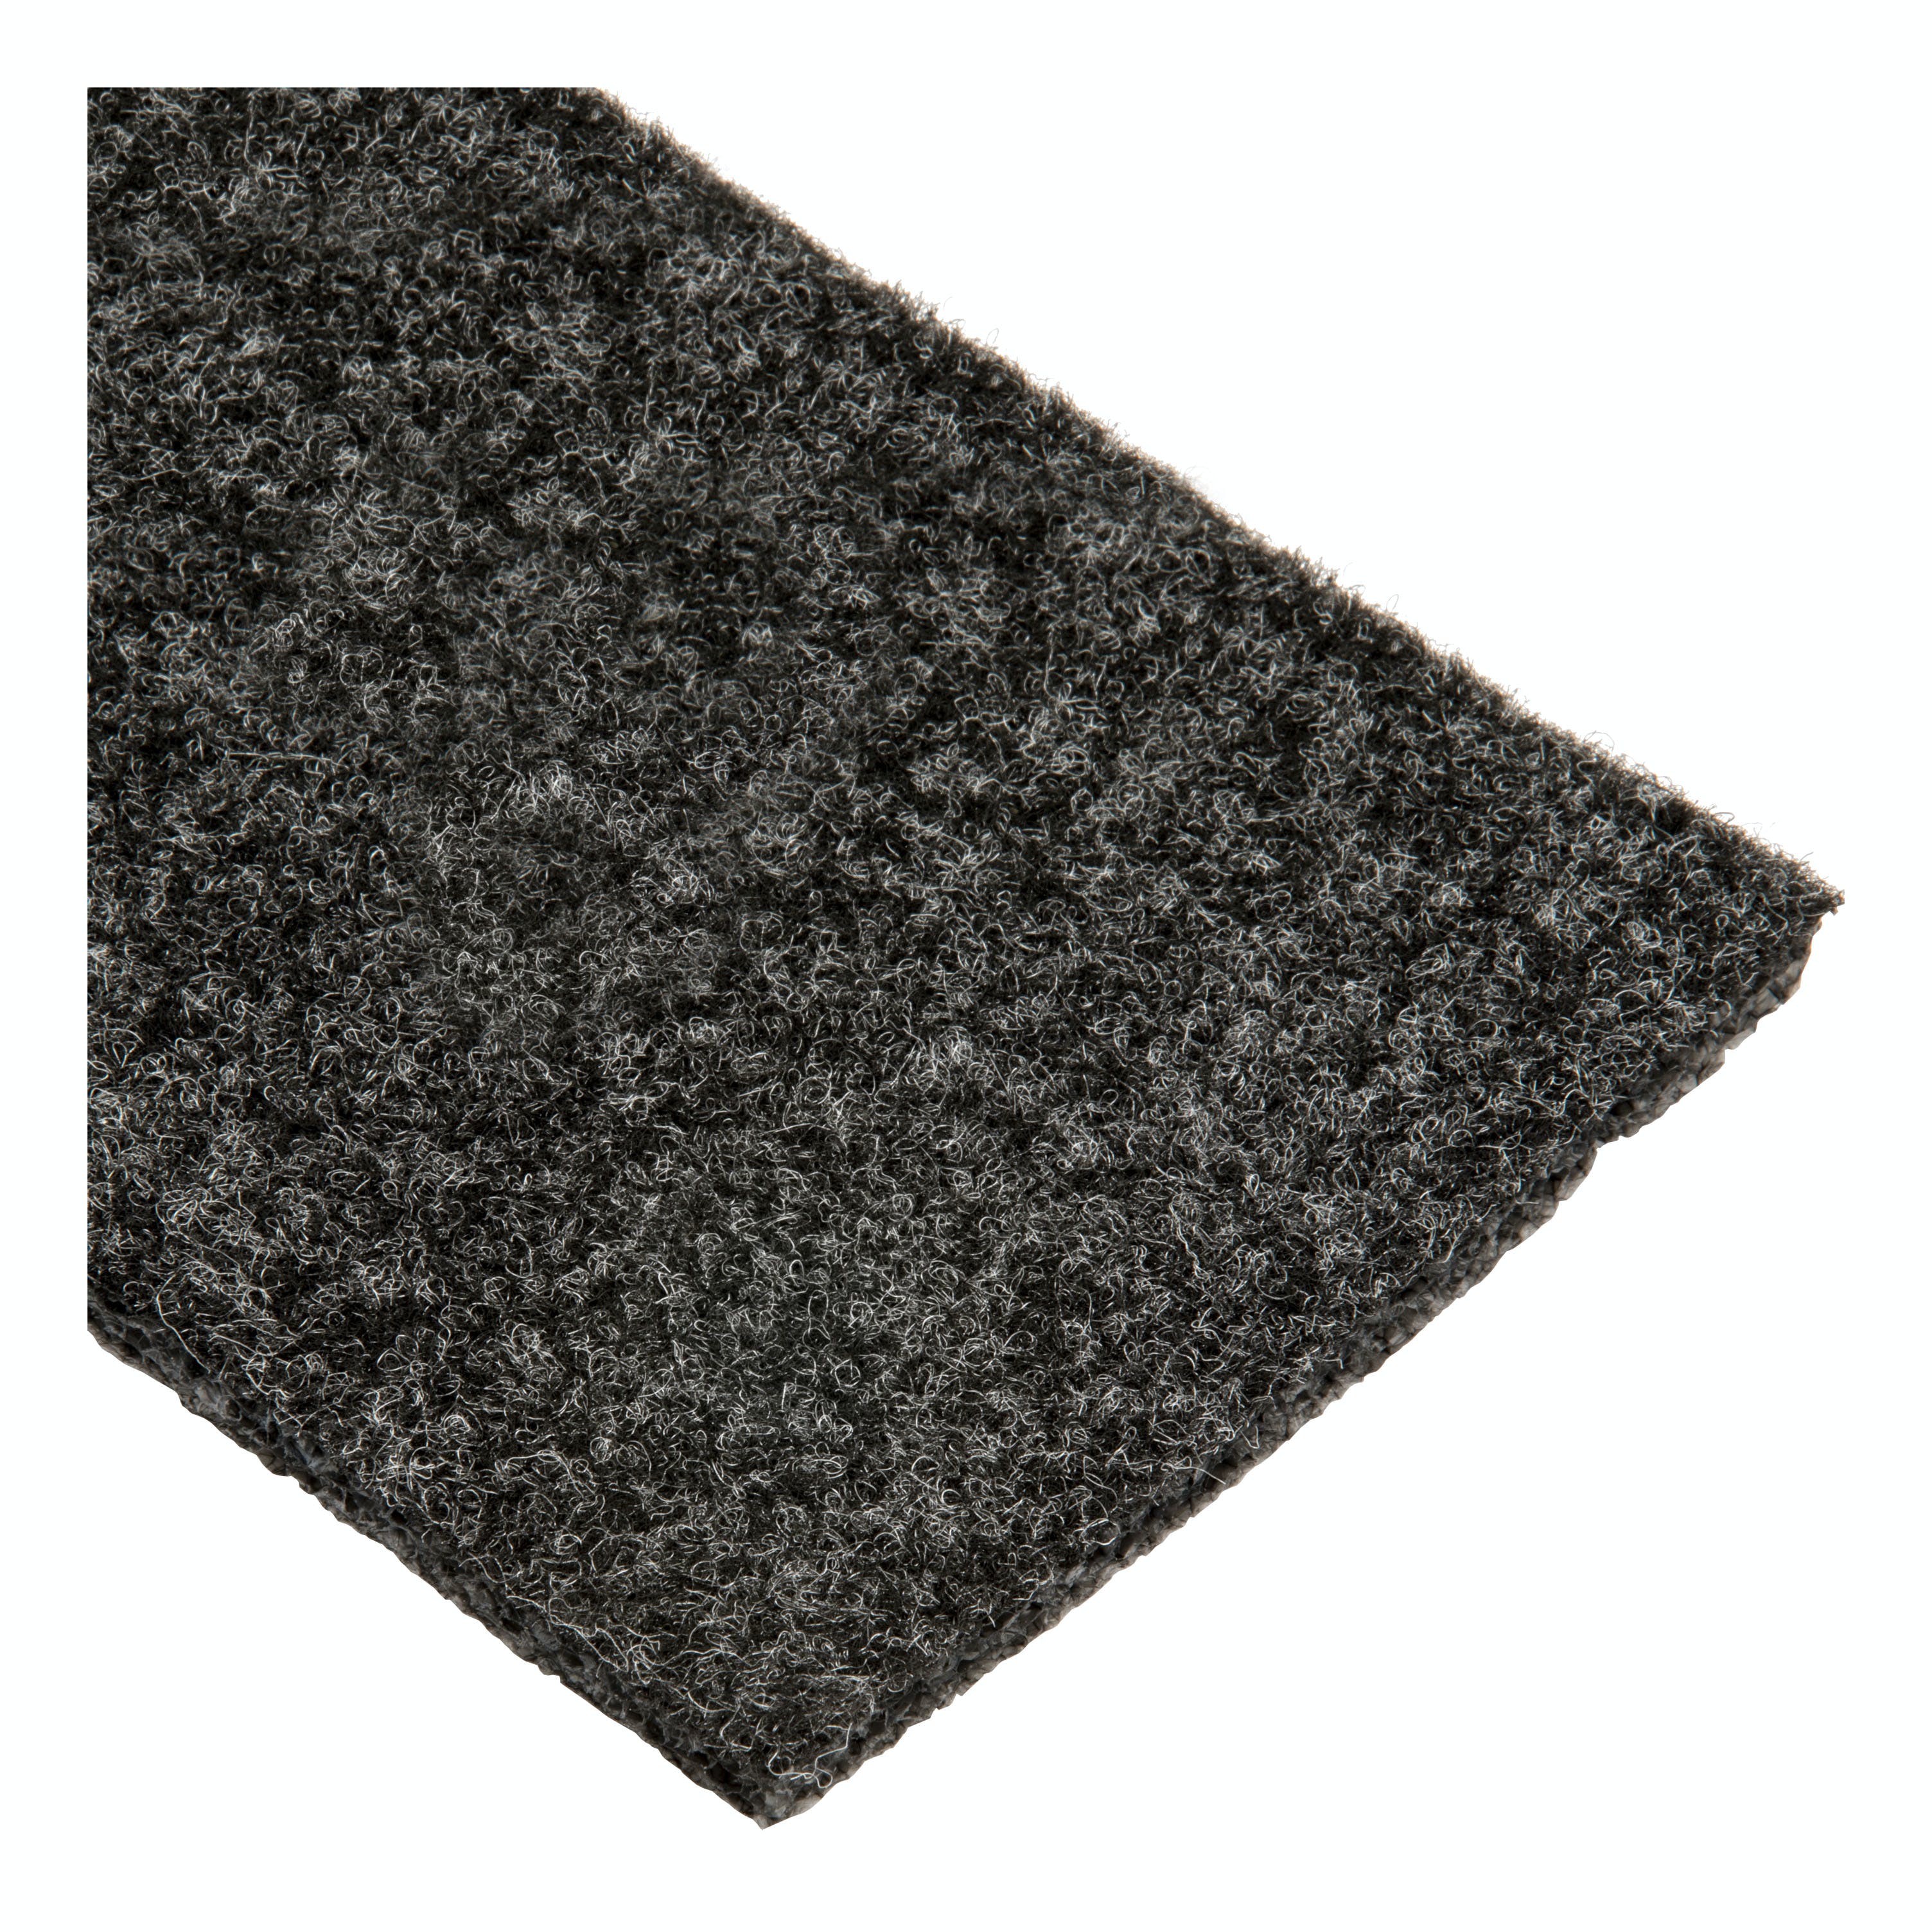 UWS UWS-BL69 Replacement BedRug Carpet Liner for Standard 69 inch Truck Tool Box